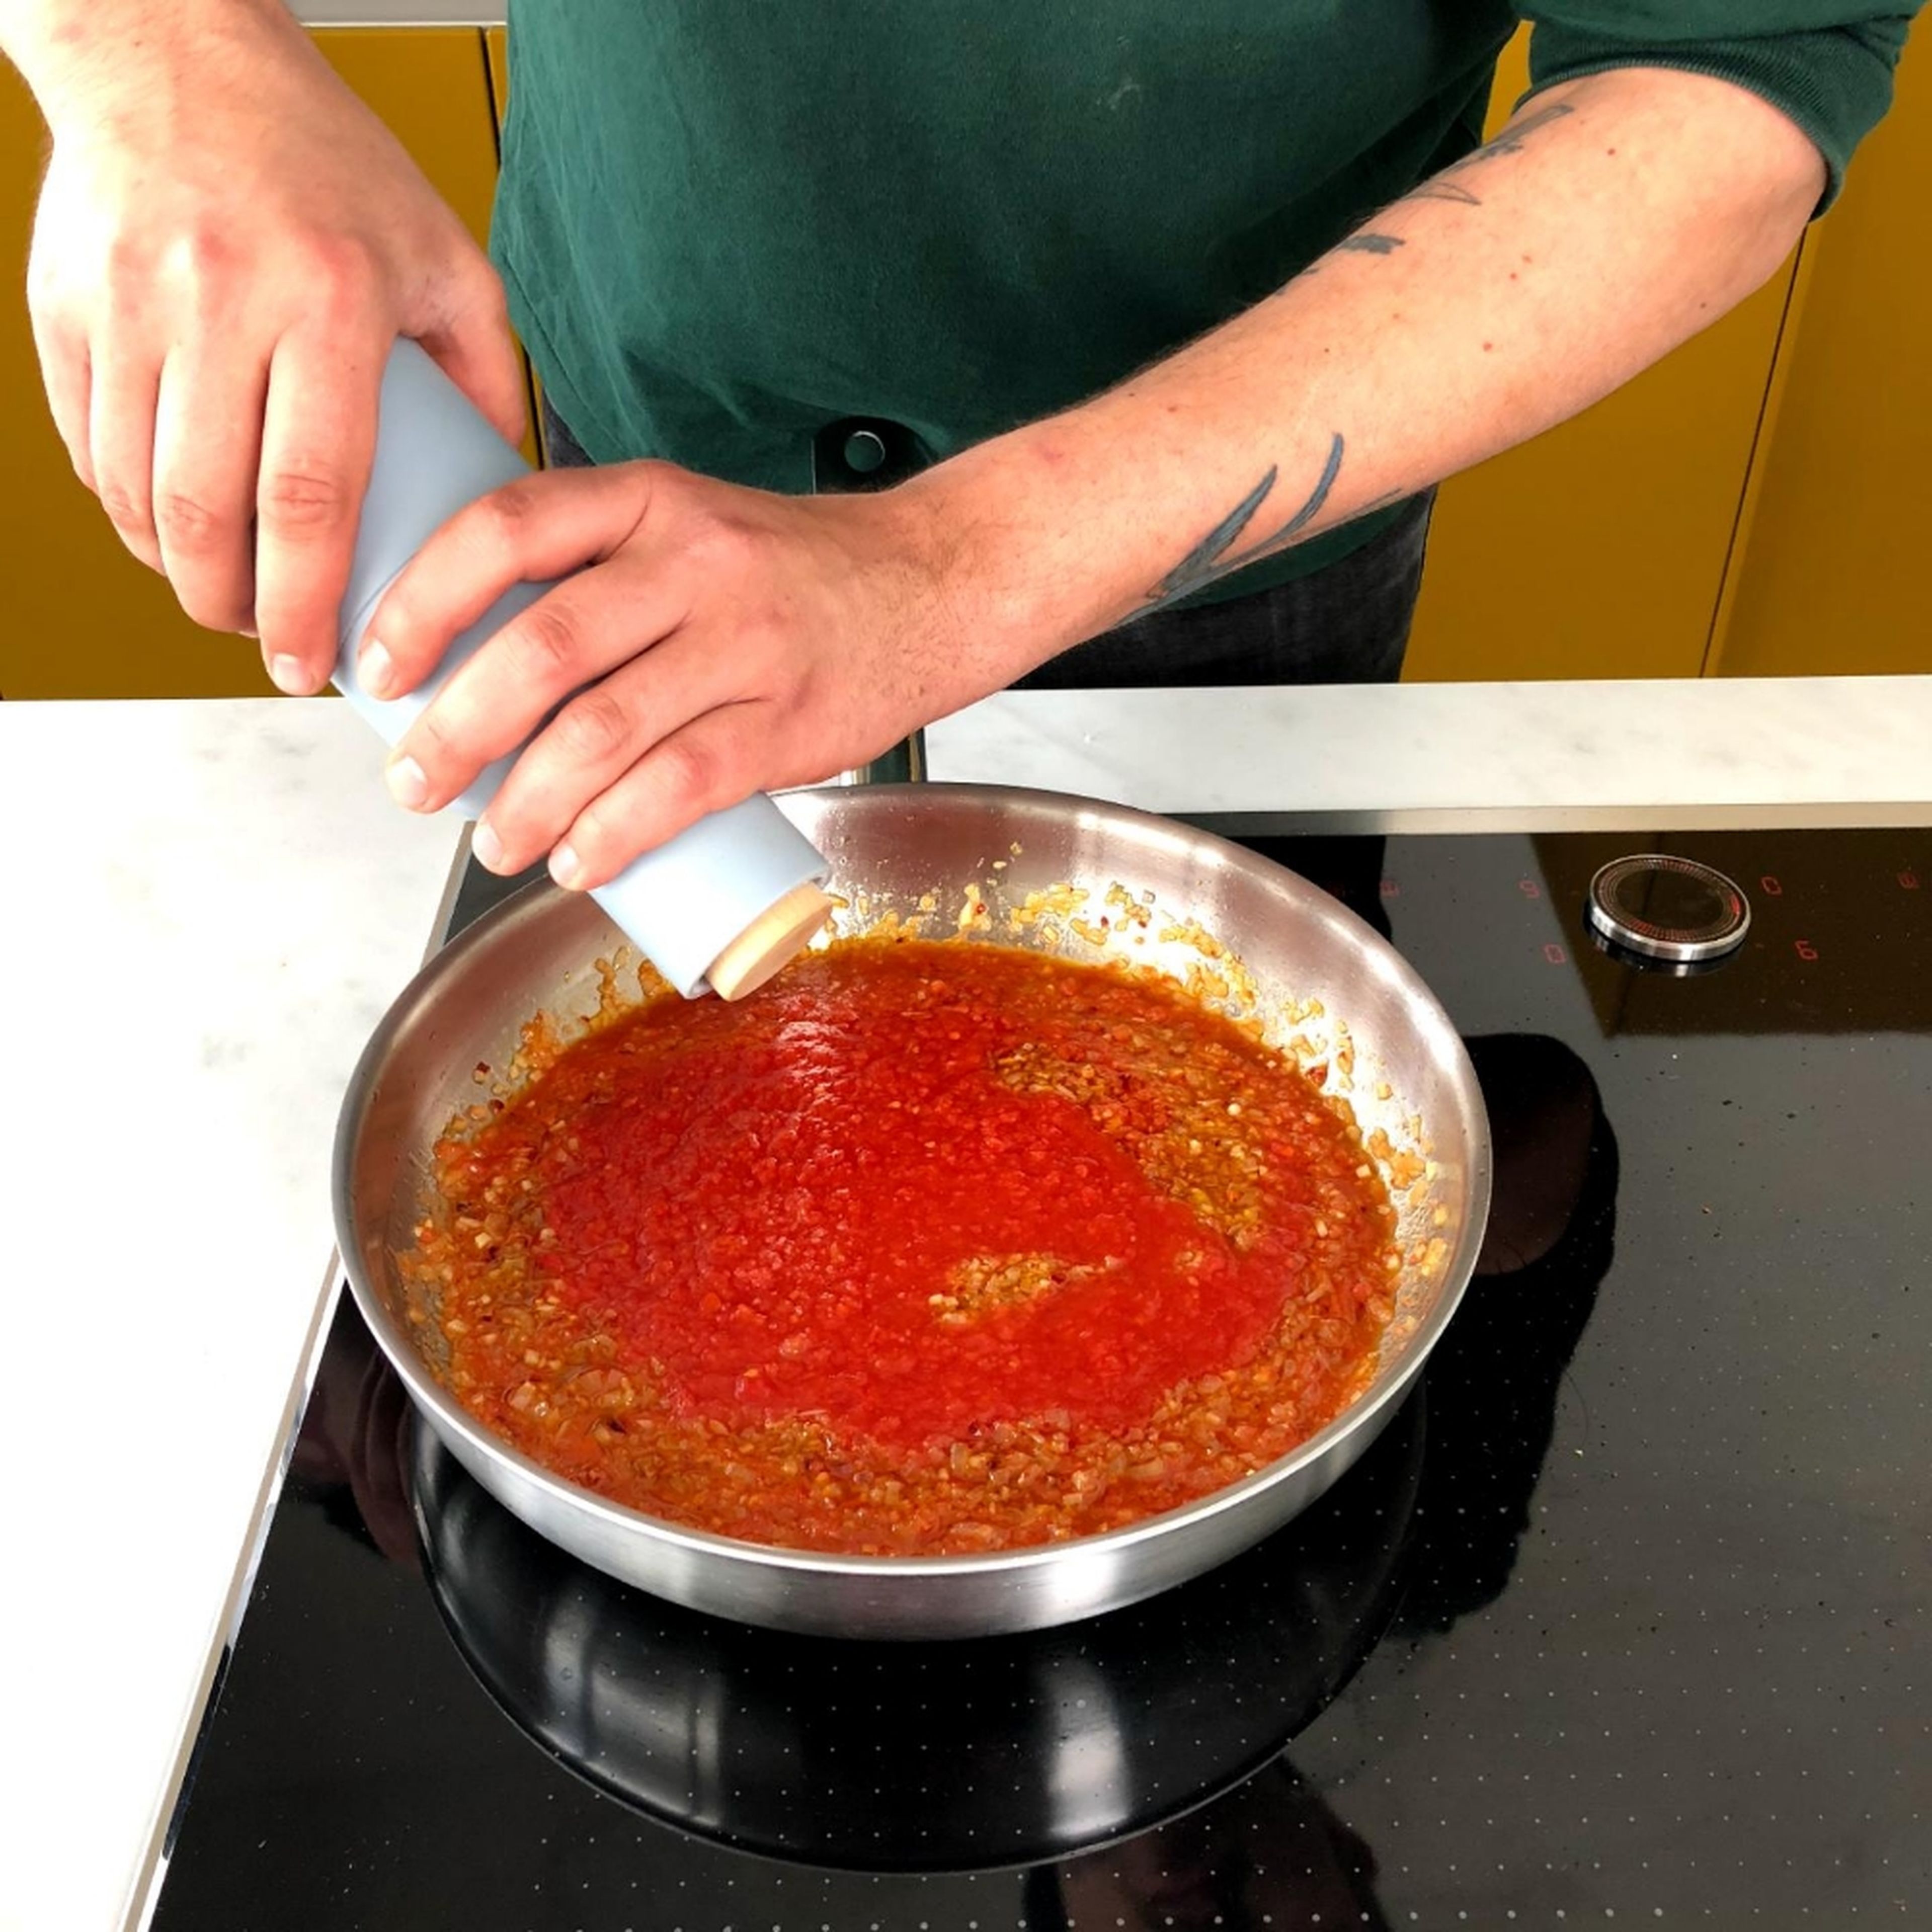 Add the chopped tomatoes and simmer the sauce for approx. 10 min. In the meantime, cook the pasta according to package instructions. Season the sauce to taste with salt, pepper and sugar.